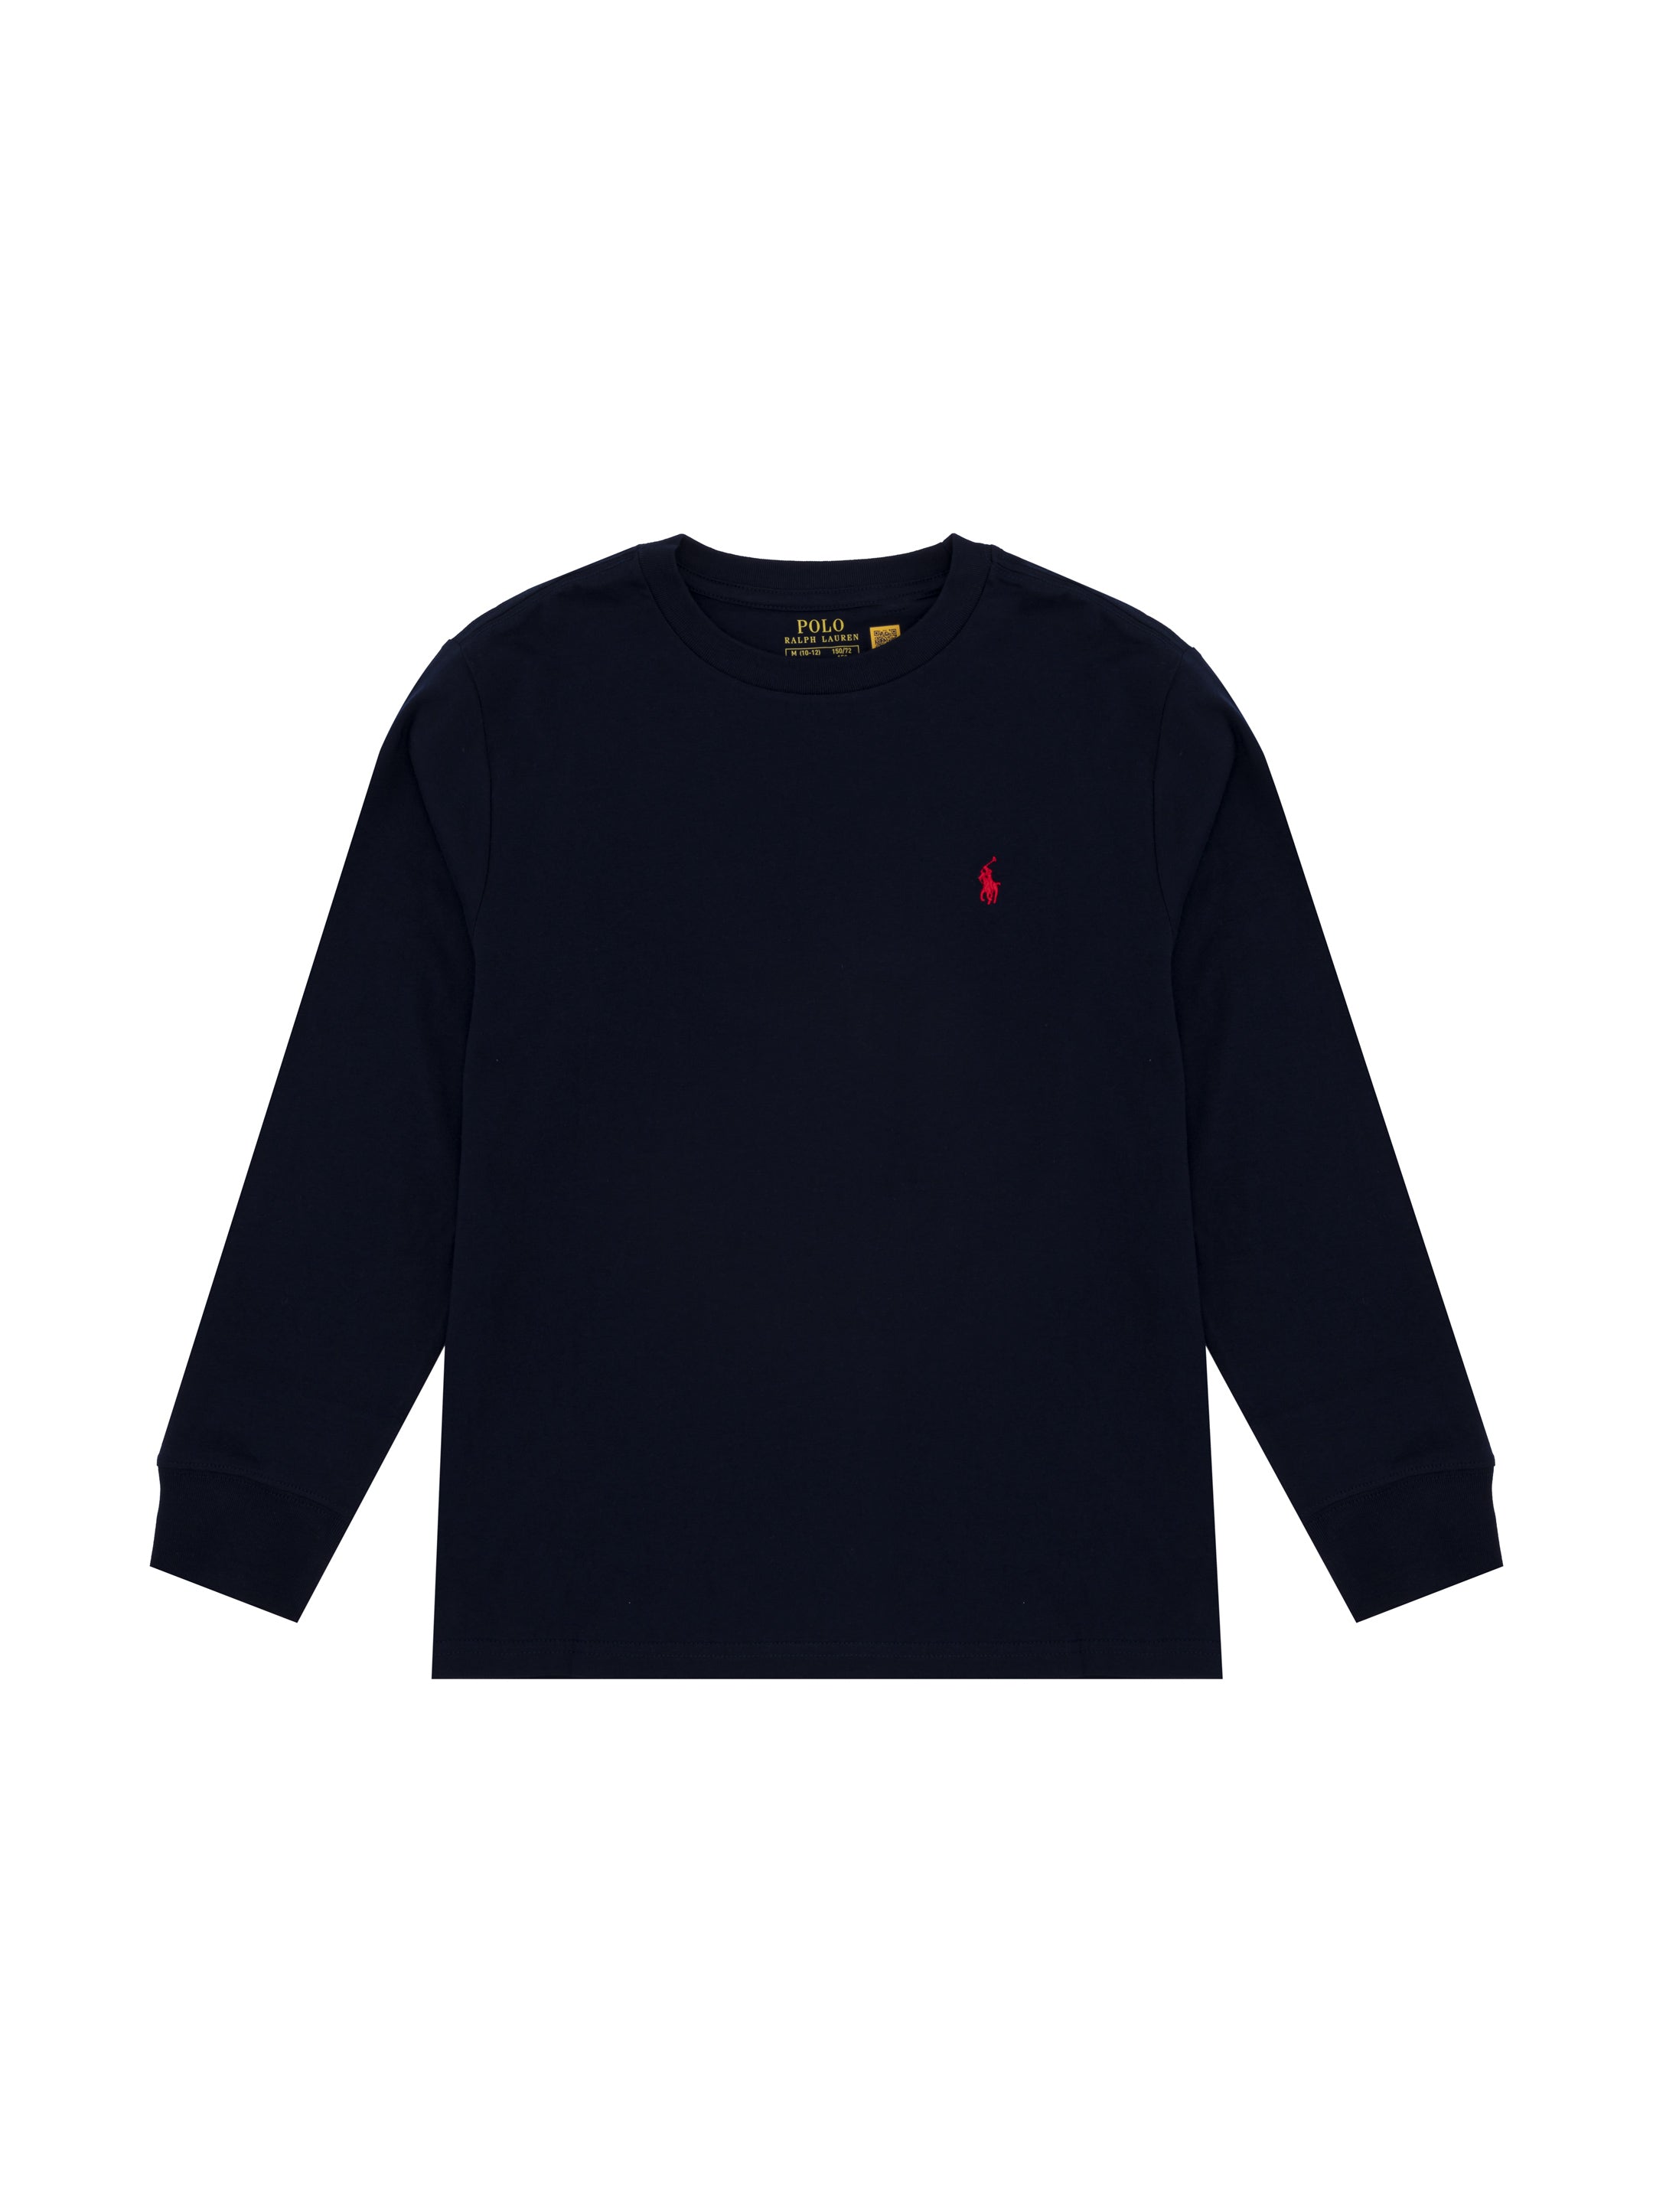 Long-sleeved T-shirt with front logo